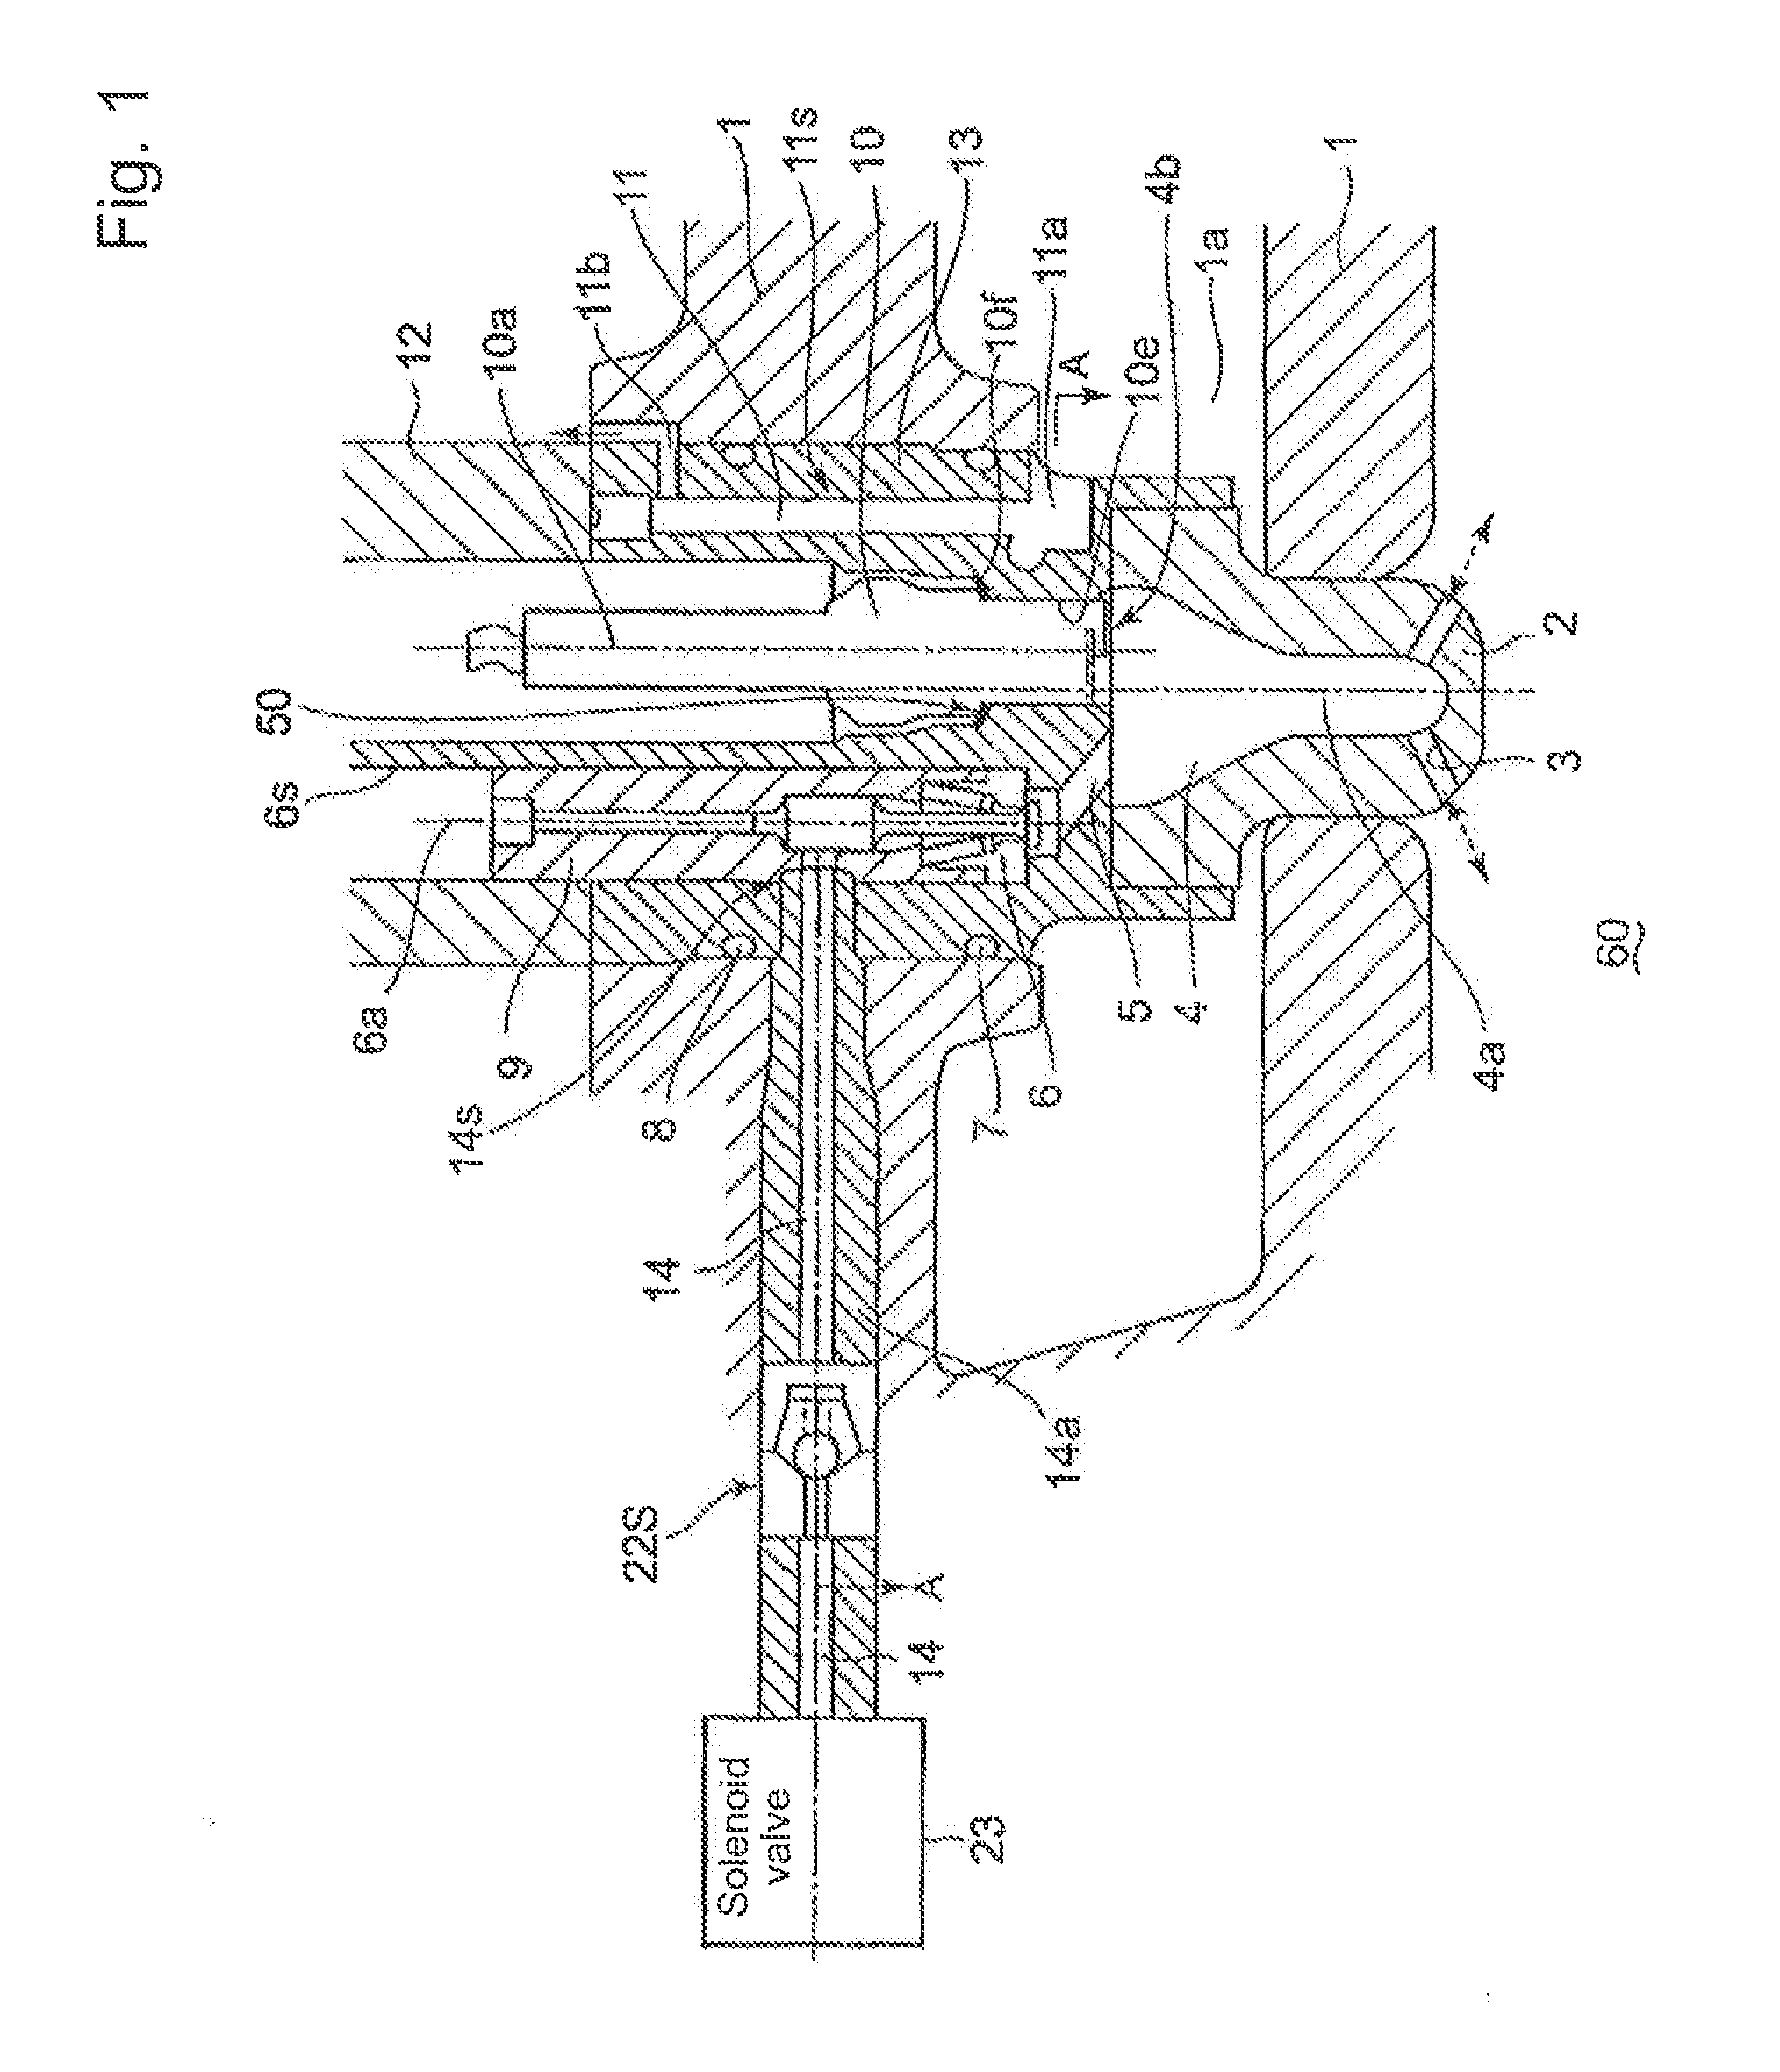 Gas engine with spark plug and bore-cooling holes